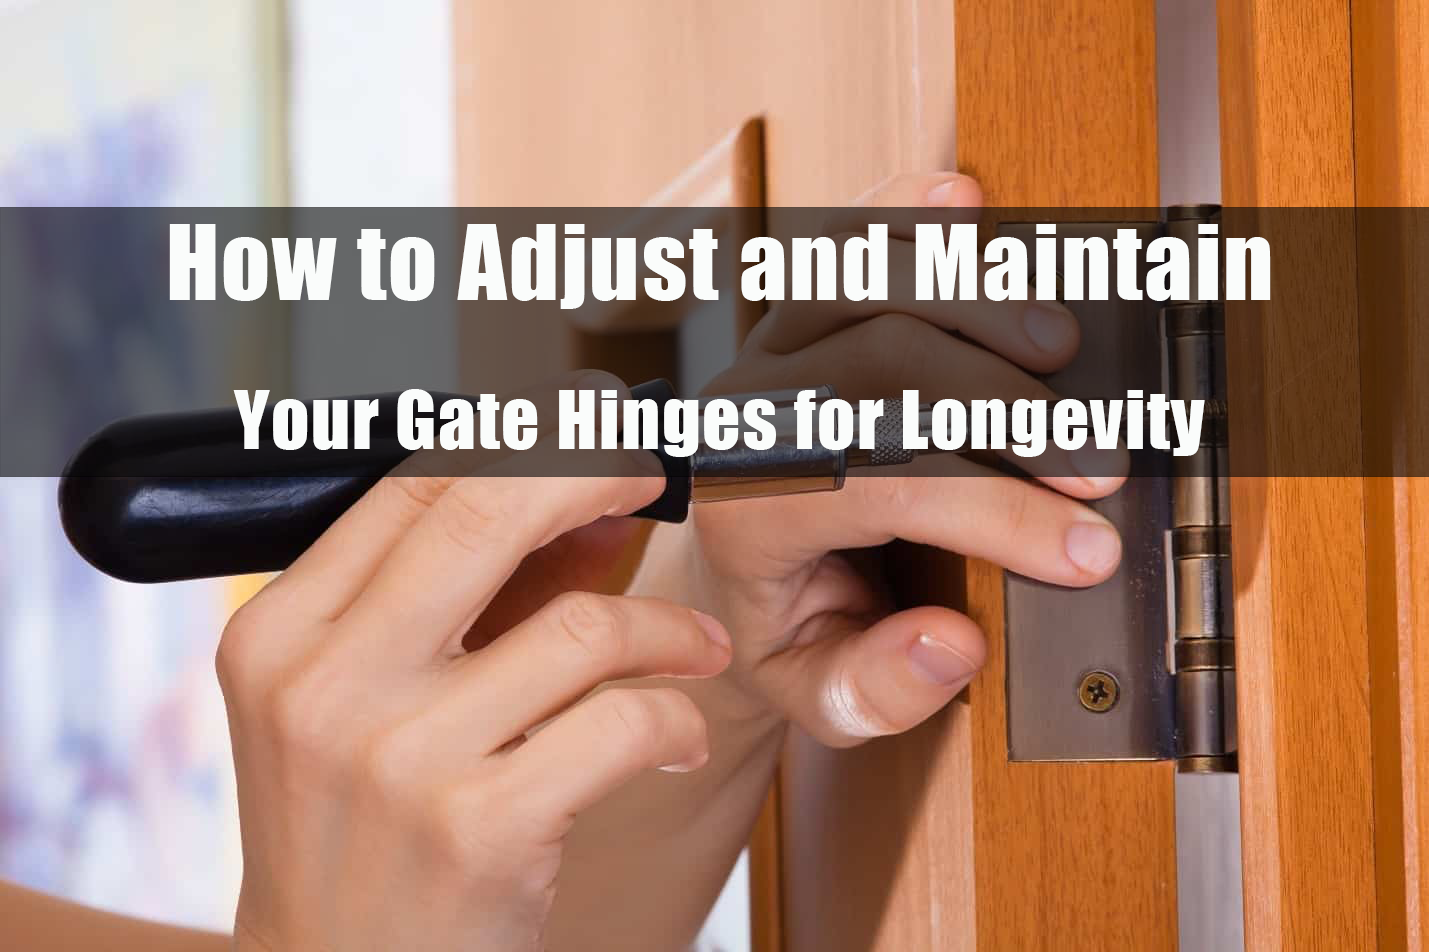 How to Adjust and Maintain Your Gate Hinges